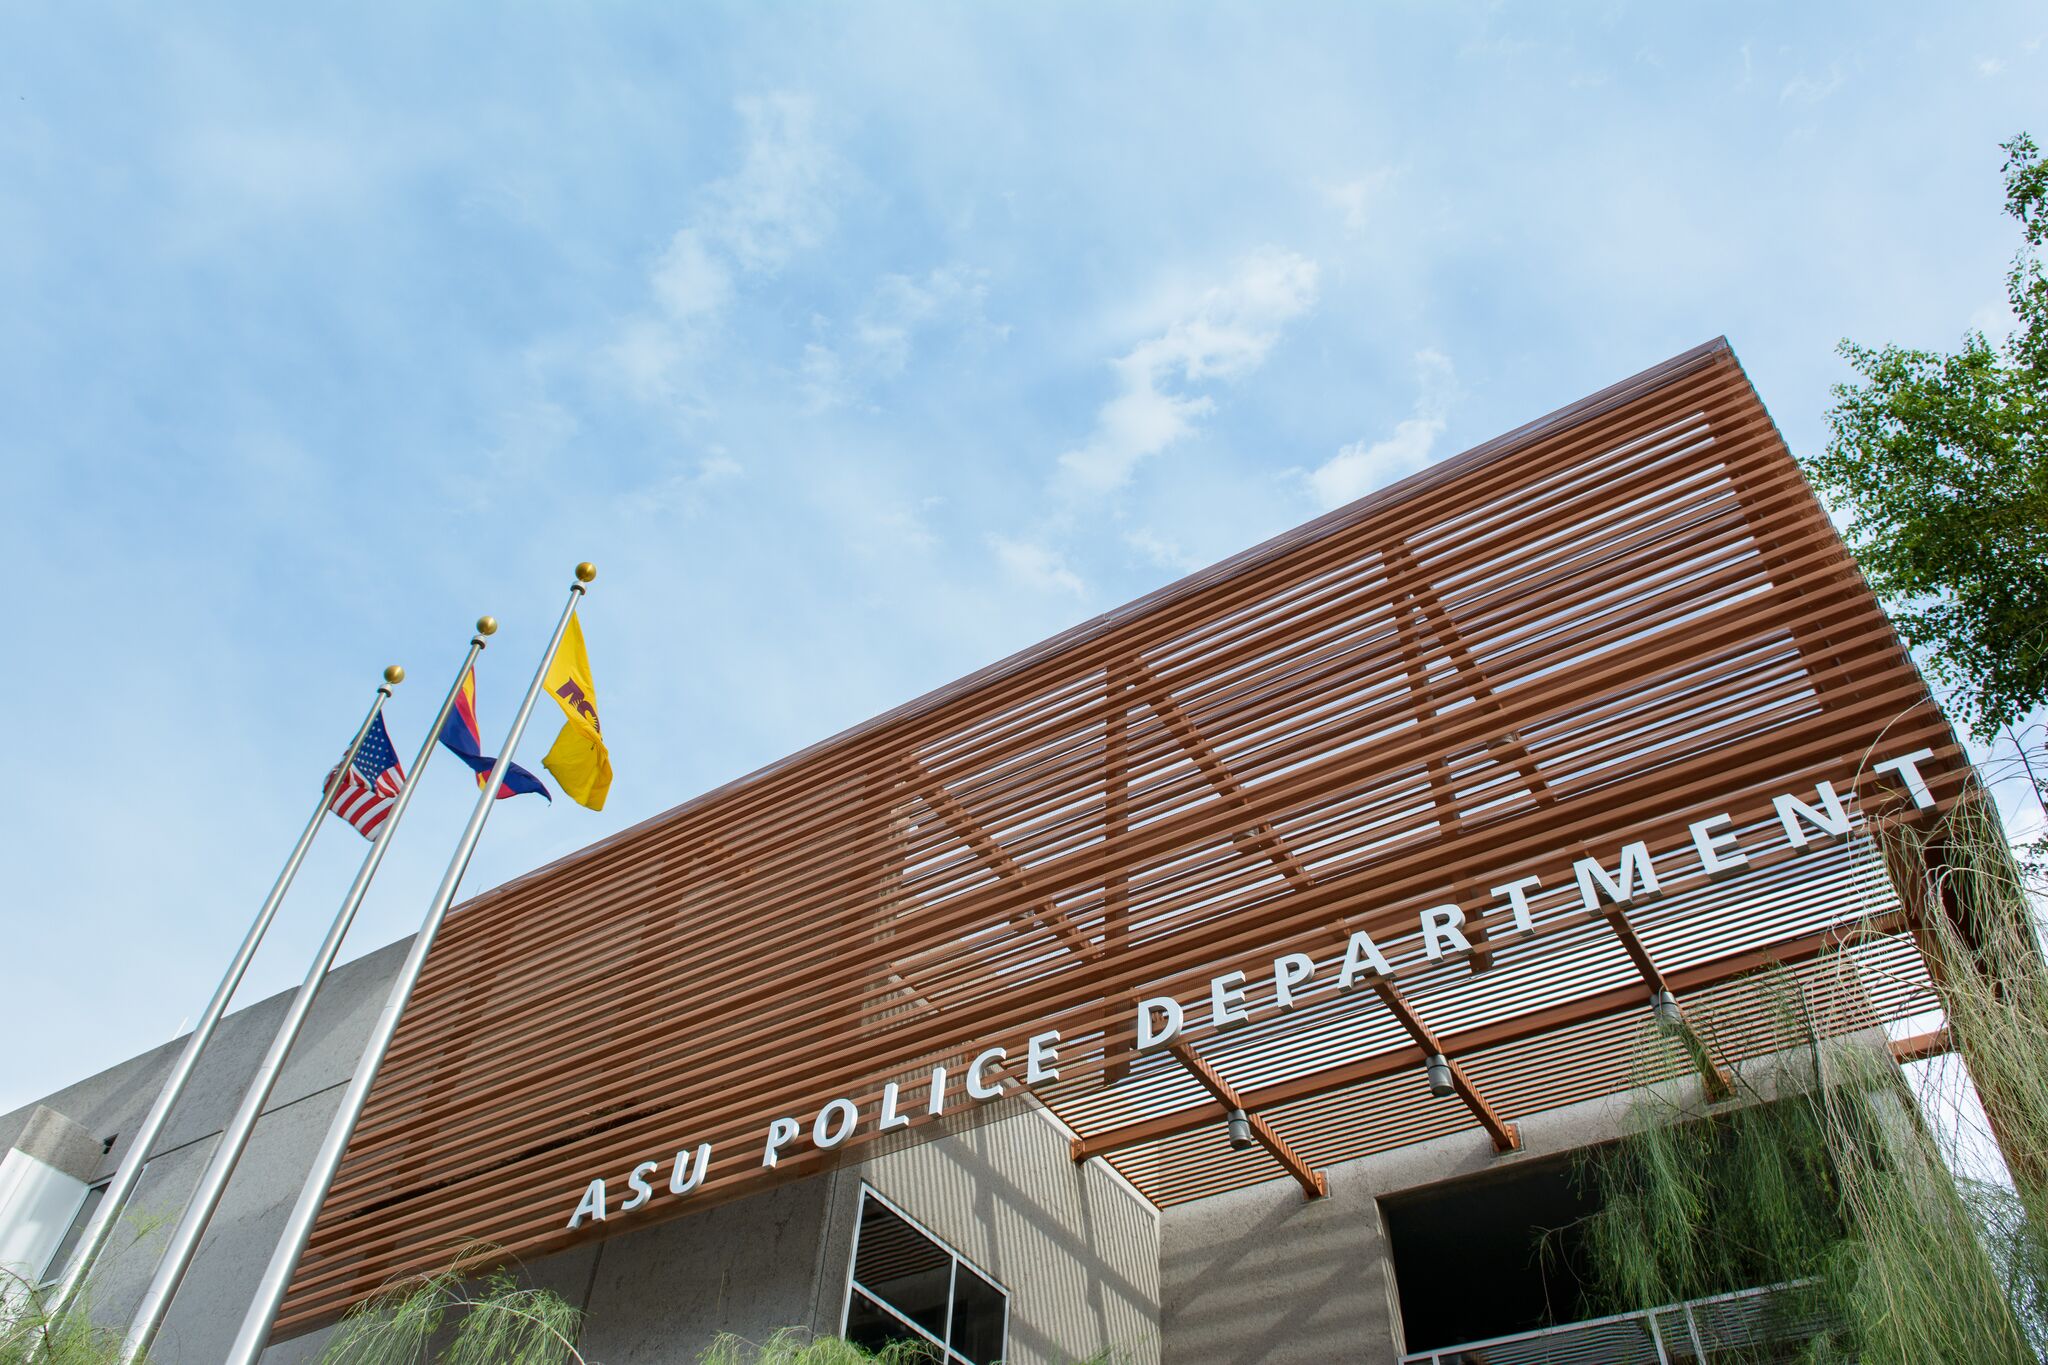 Image of the ASU Police Department